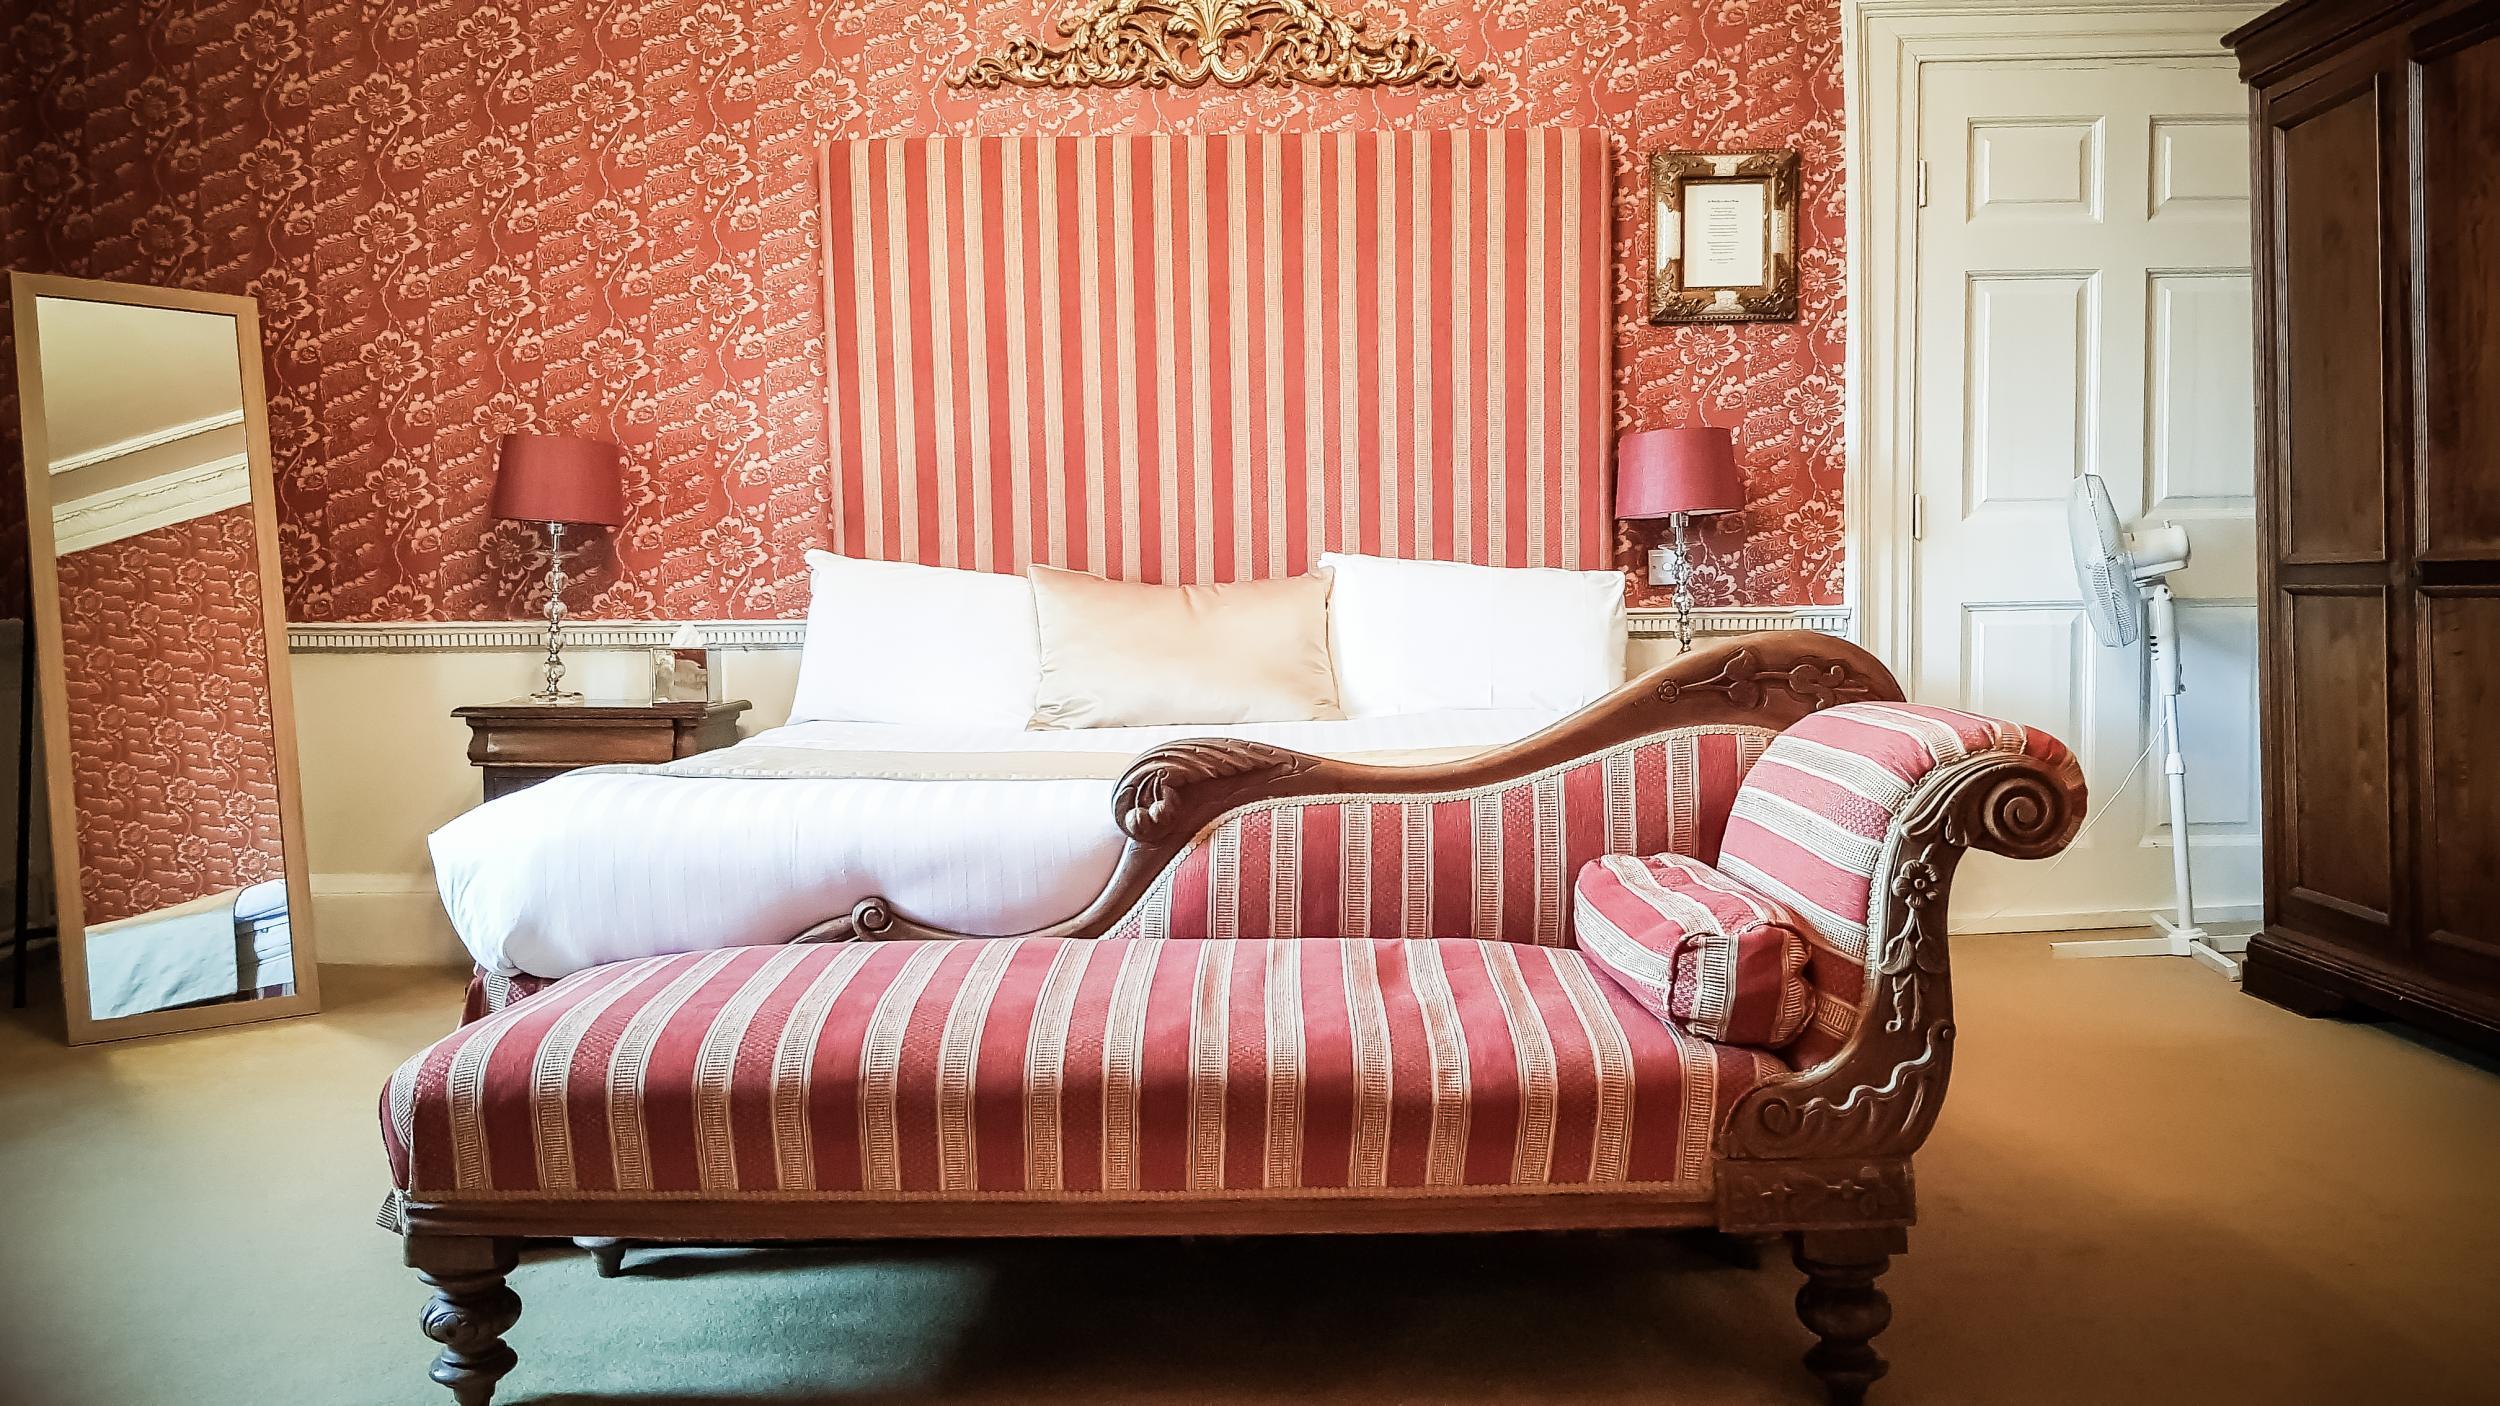 There are 16 Grade II-listed, decadent rooms to be found at Colwick Hall.